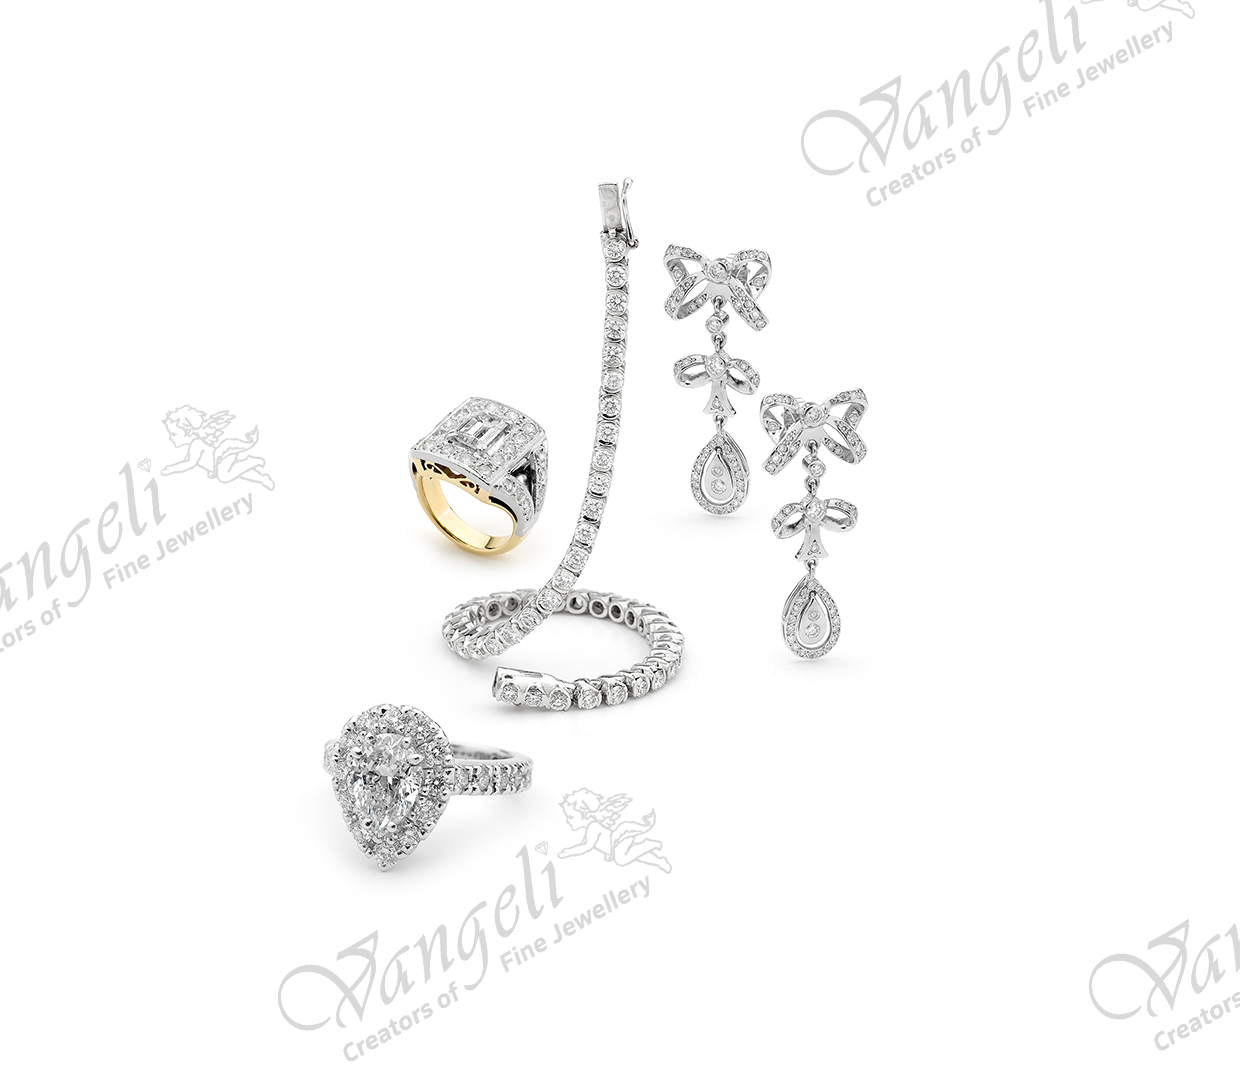 18ct gold and platinum hand-made jewellery